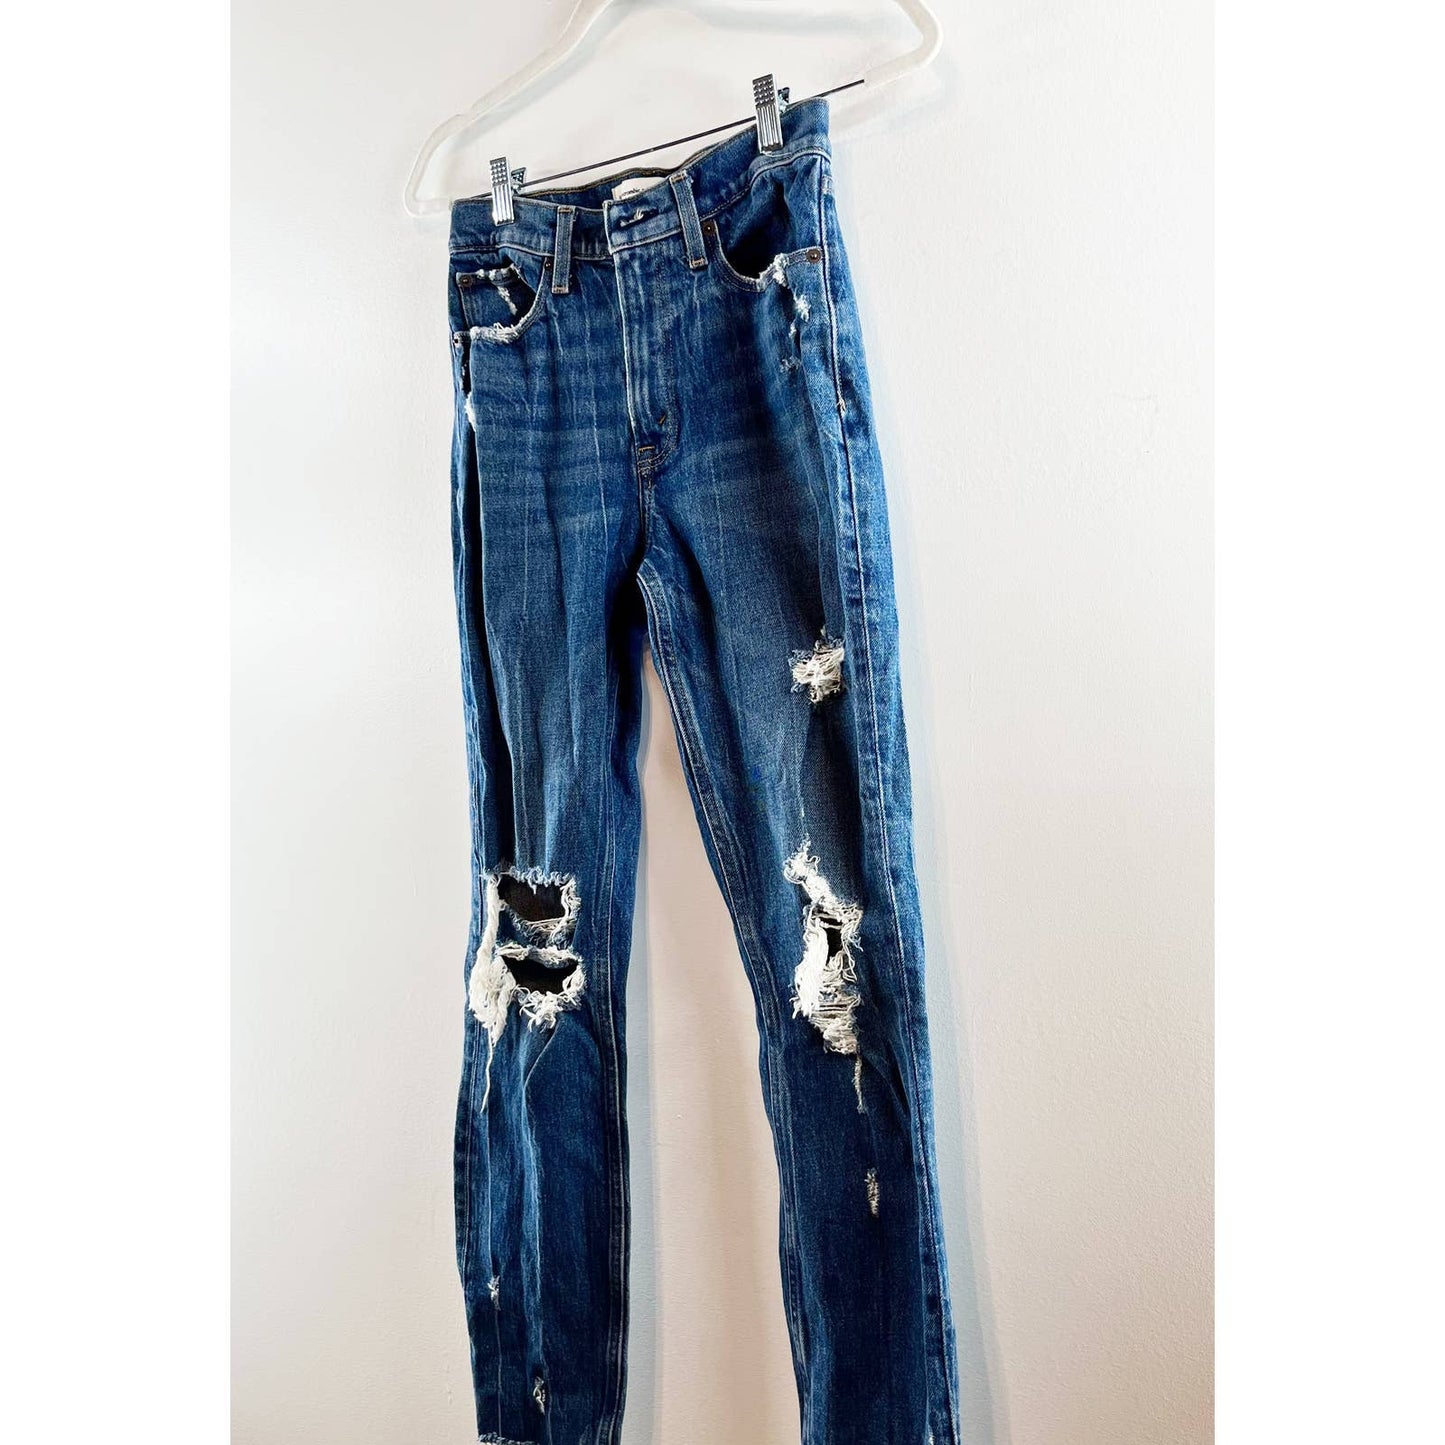 Abercrombie & Fitch High Rise Distressed Mom Jeans Medium Wash Blue 25 / 0 Long